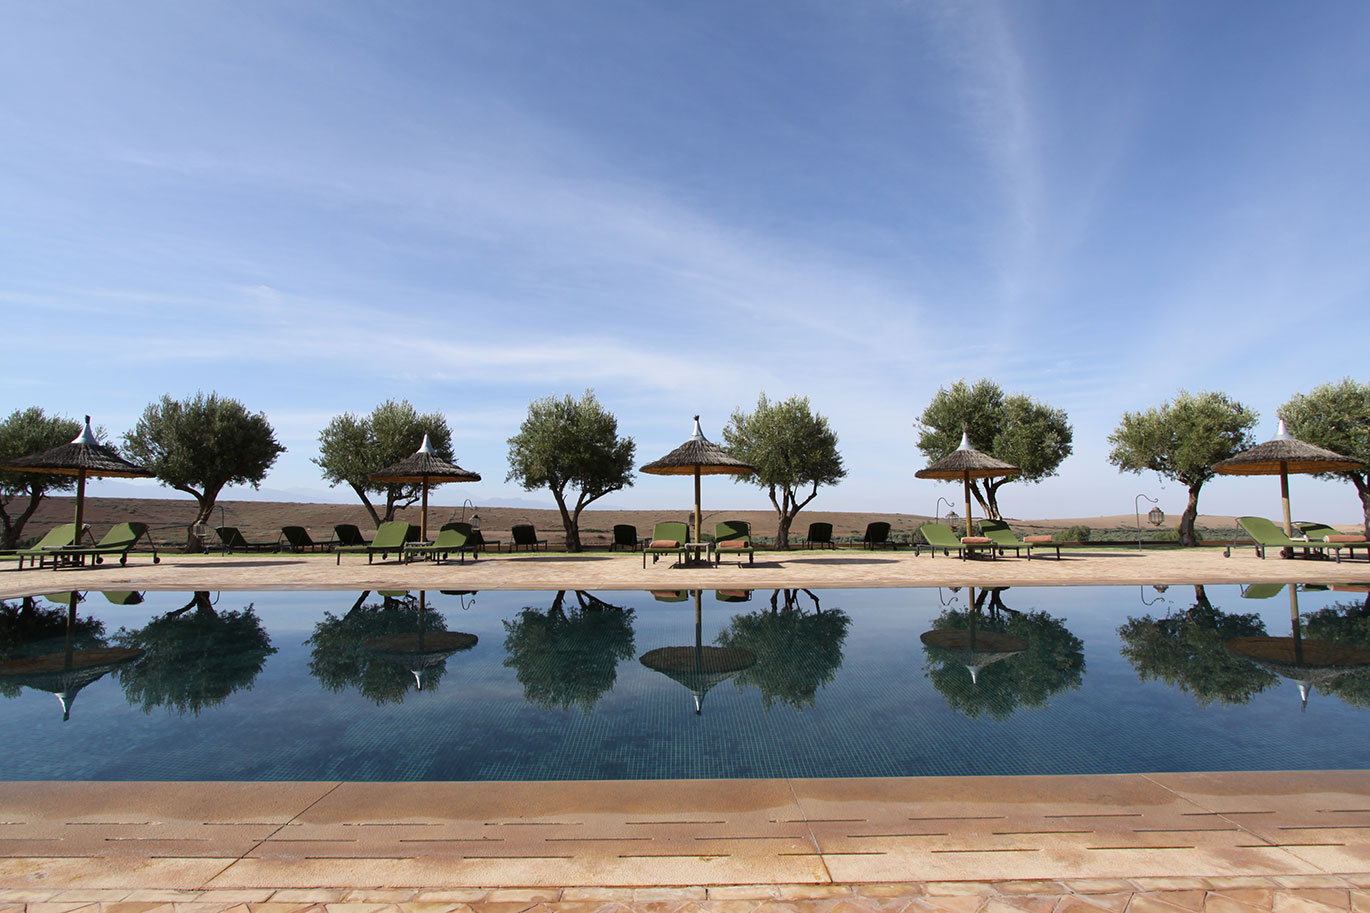 Pool in Marrakech with loungers and trees